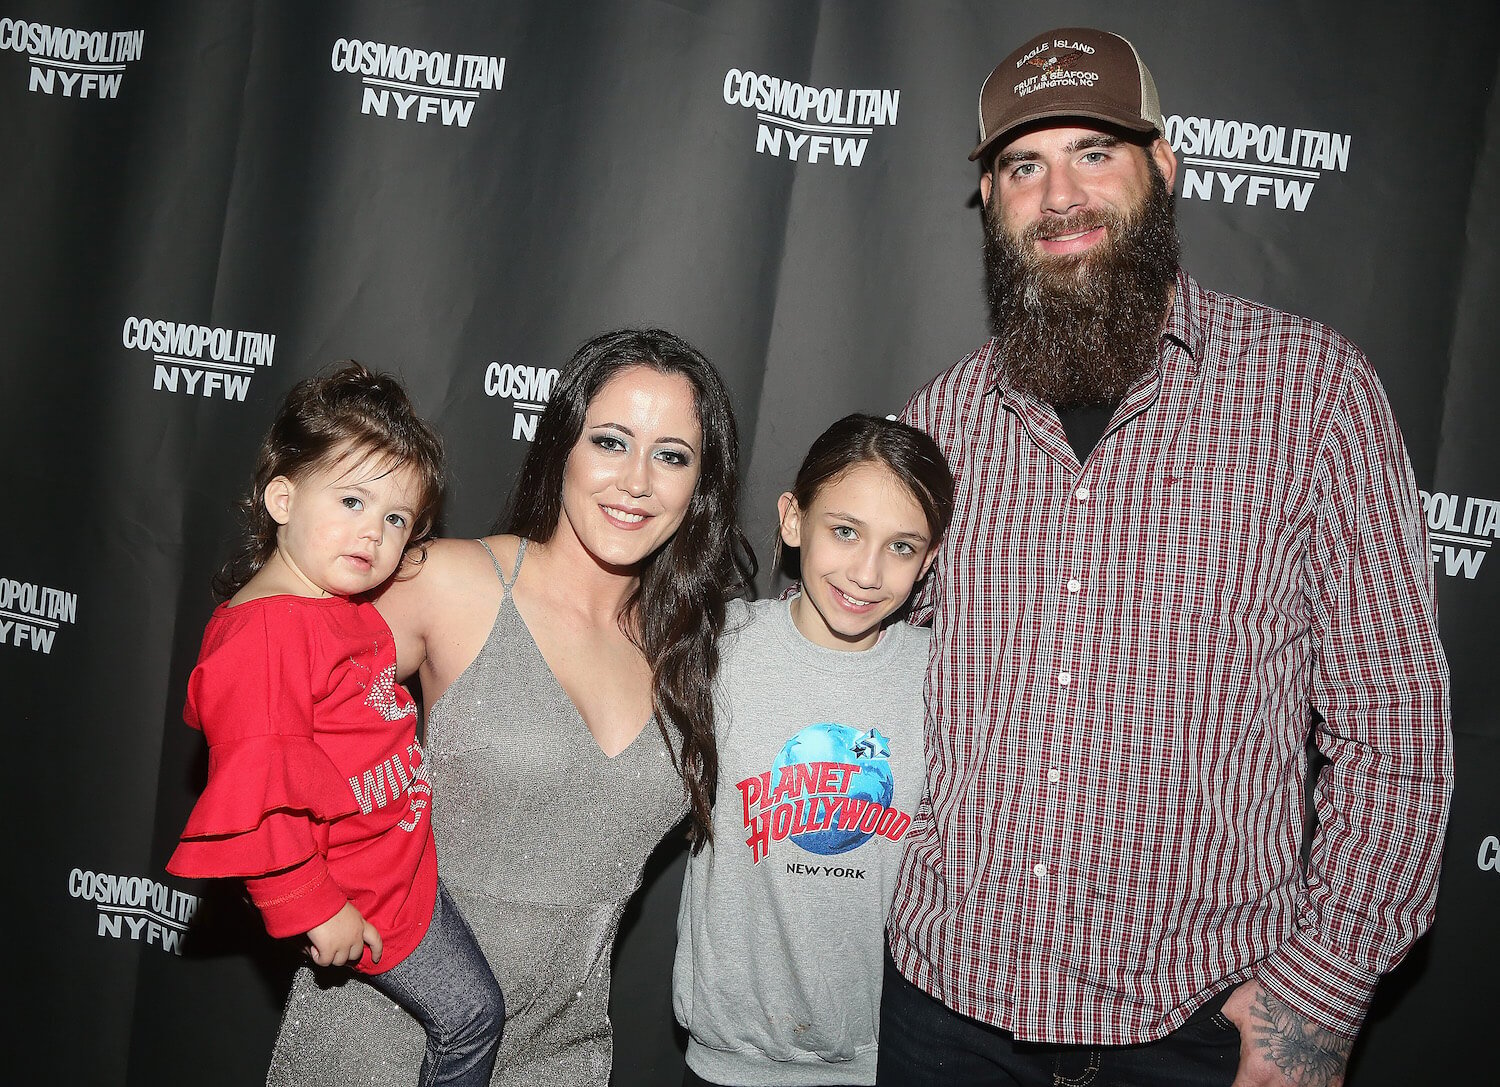 Ensley Jolie Eason, 'Teen Mom 2' star Jenelle Evans, Maryssa Eason, and David Eason standing next to each other and smiling at an event